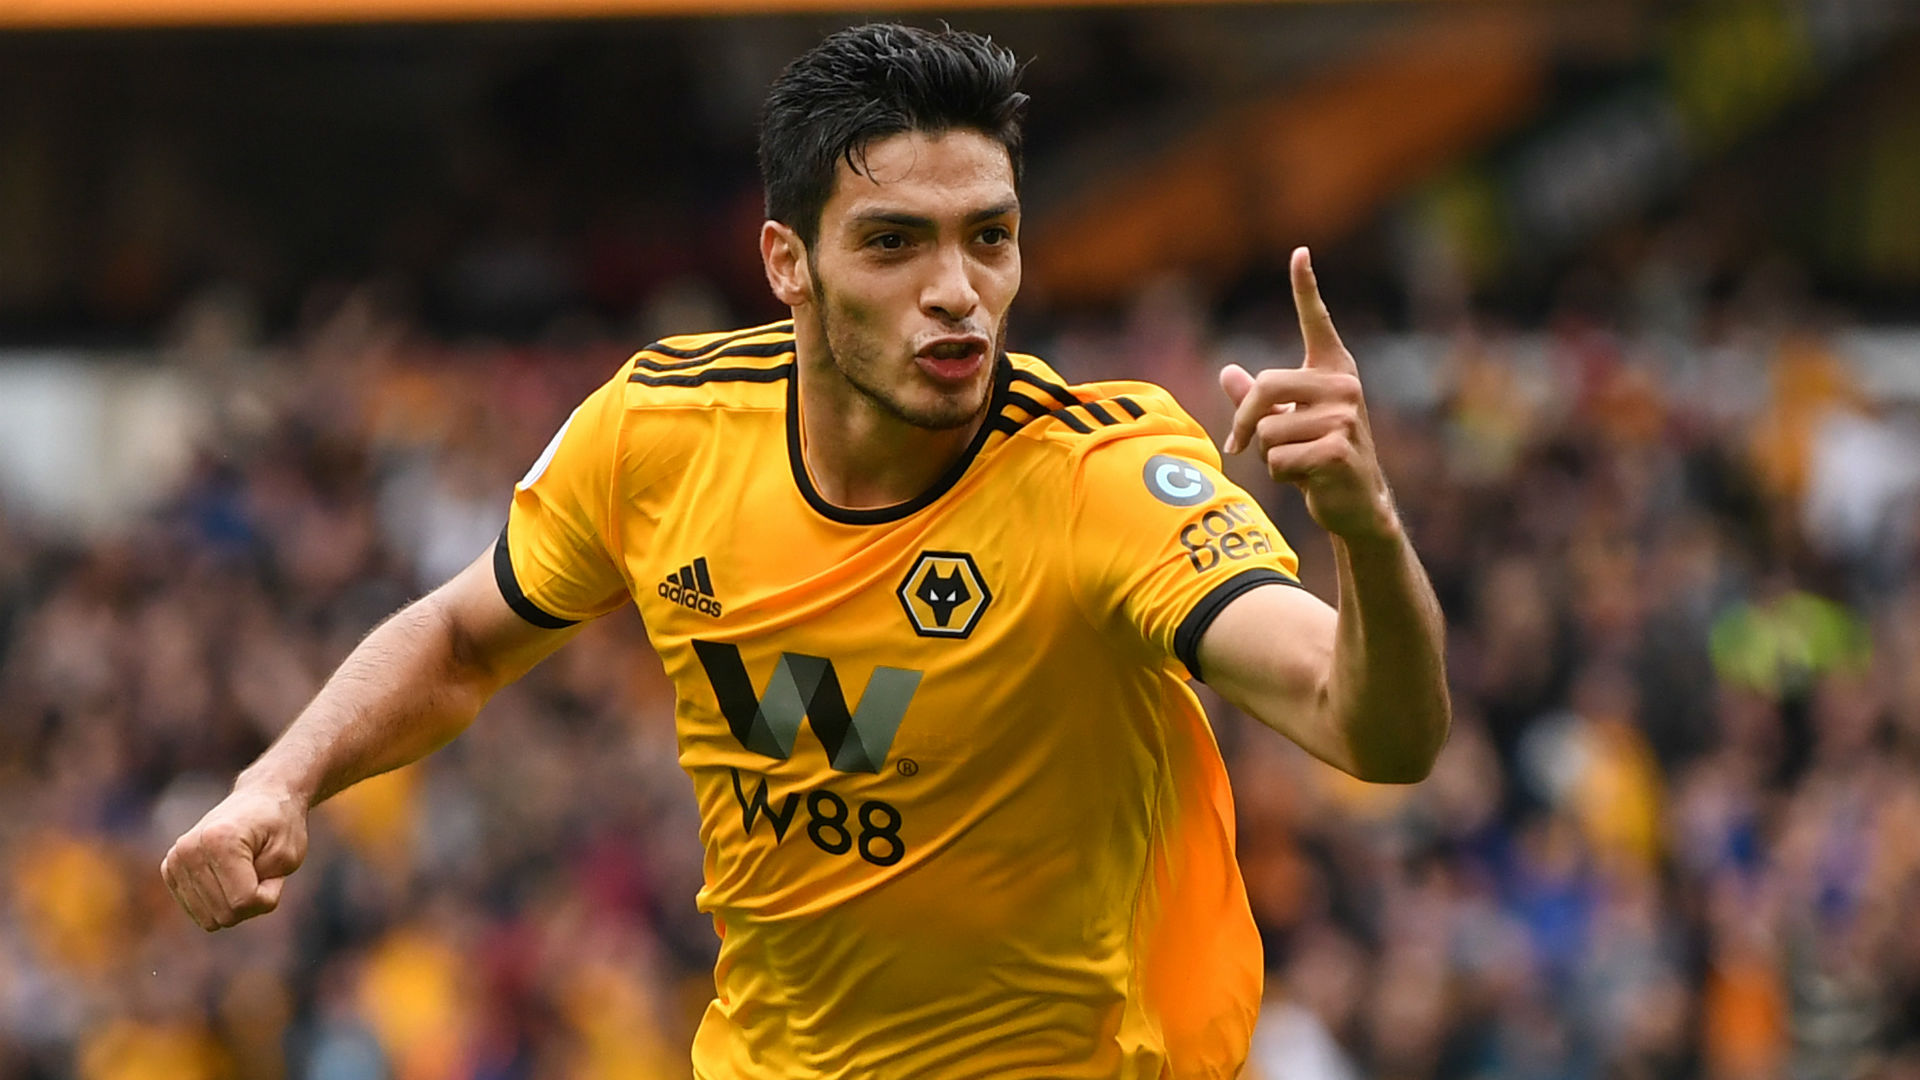 raul jimenez wolves manchester united fa cup 2019 py6wbsenmuc1j251vy2y8gmk 1